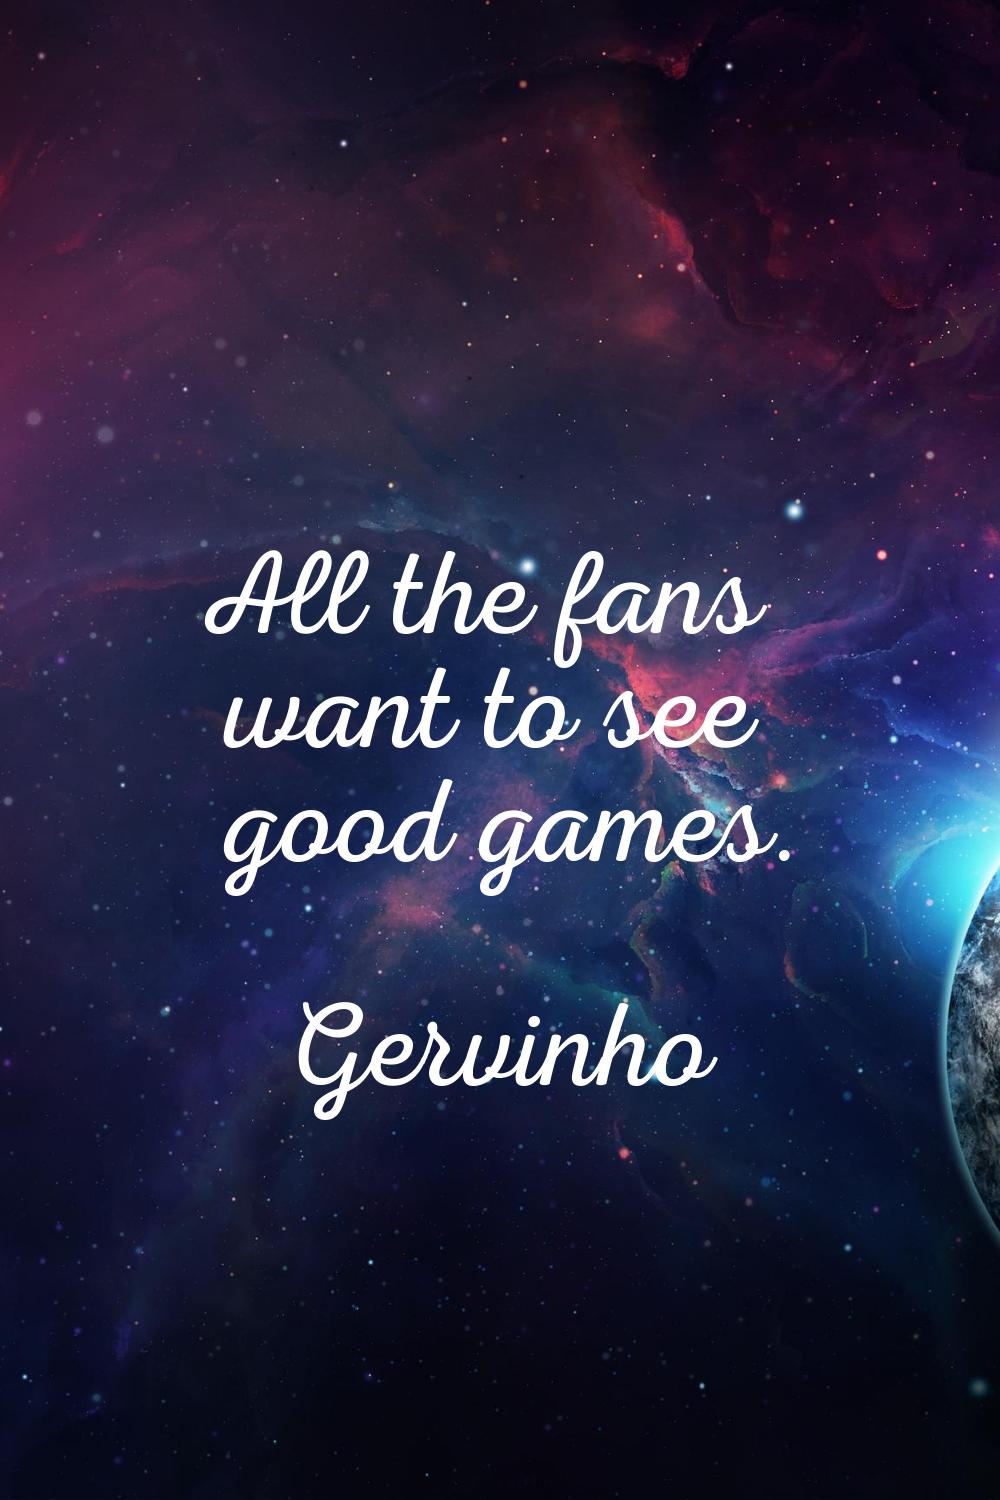 All the fans want to see good games.